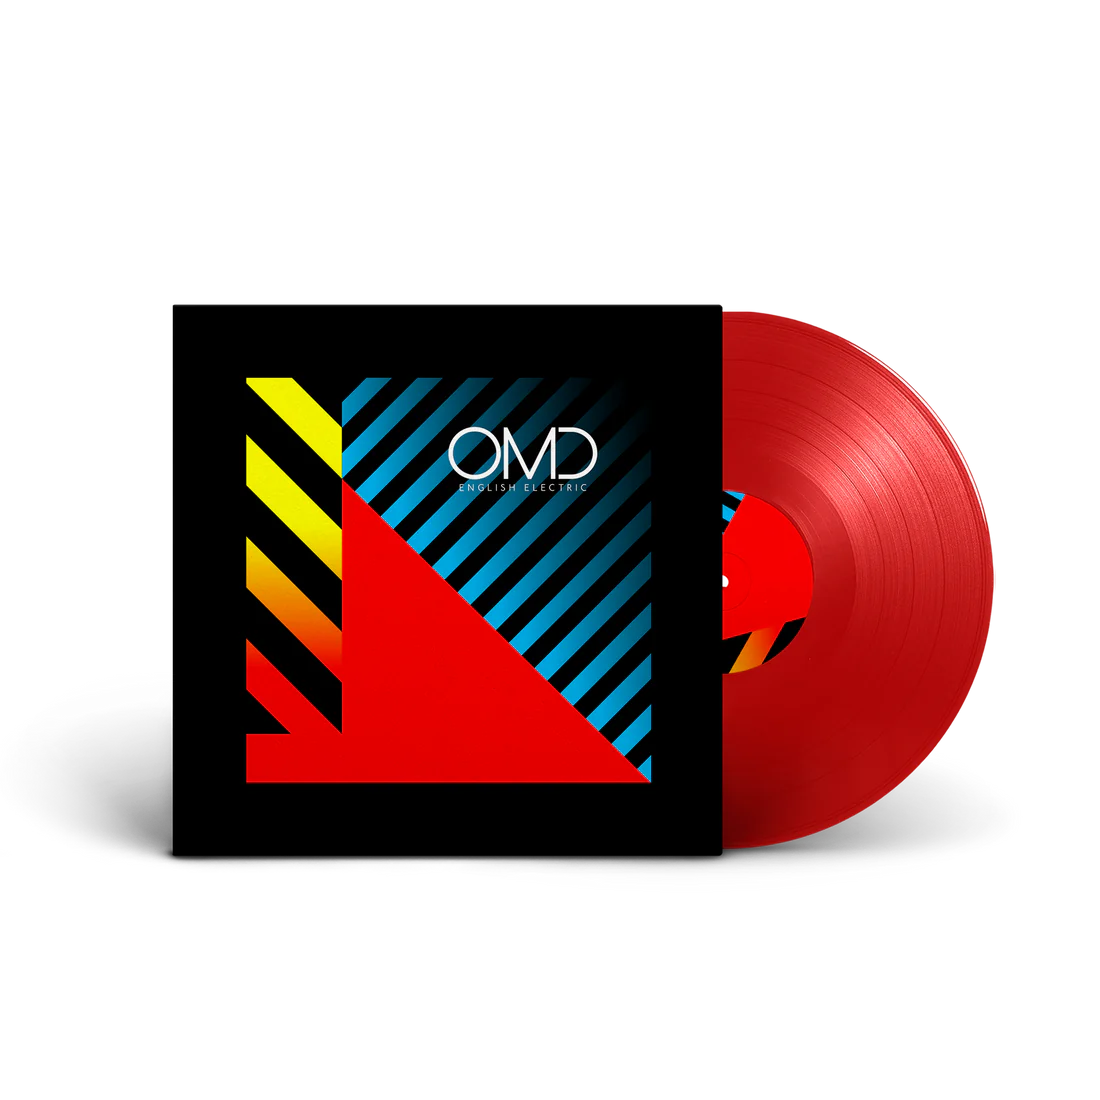 OMD - English Electric: Limited Red Vinyl LP